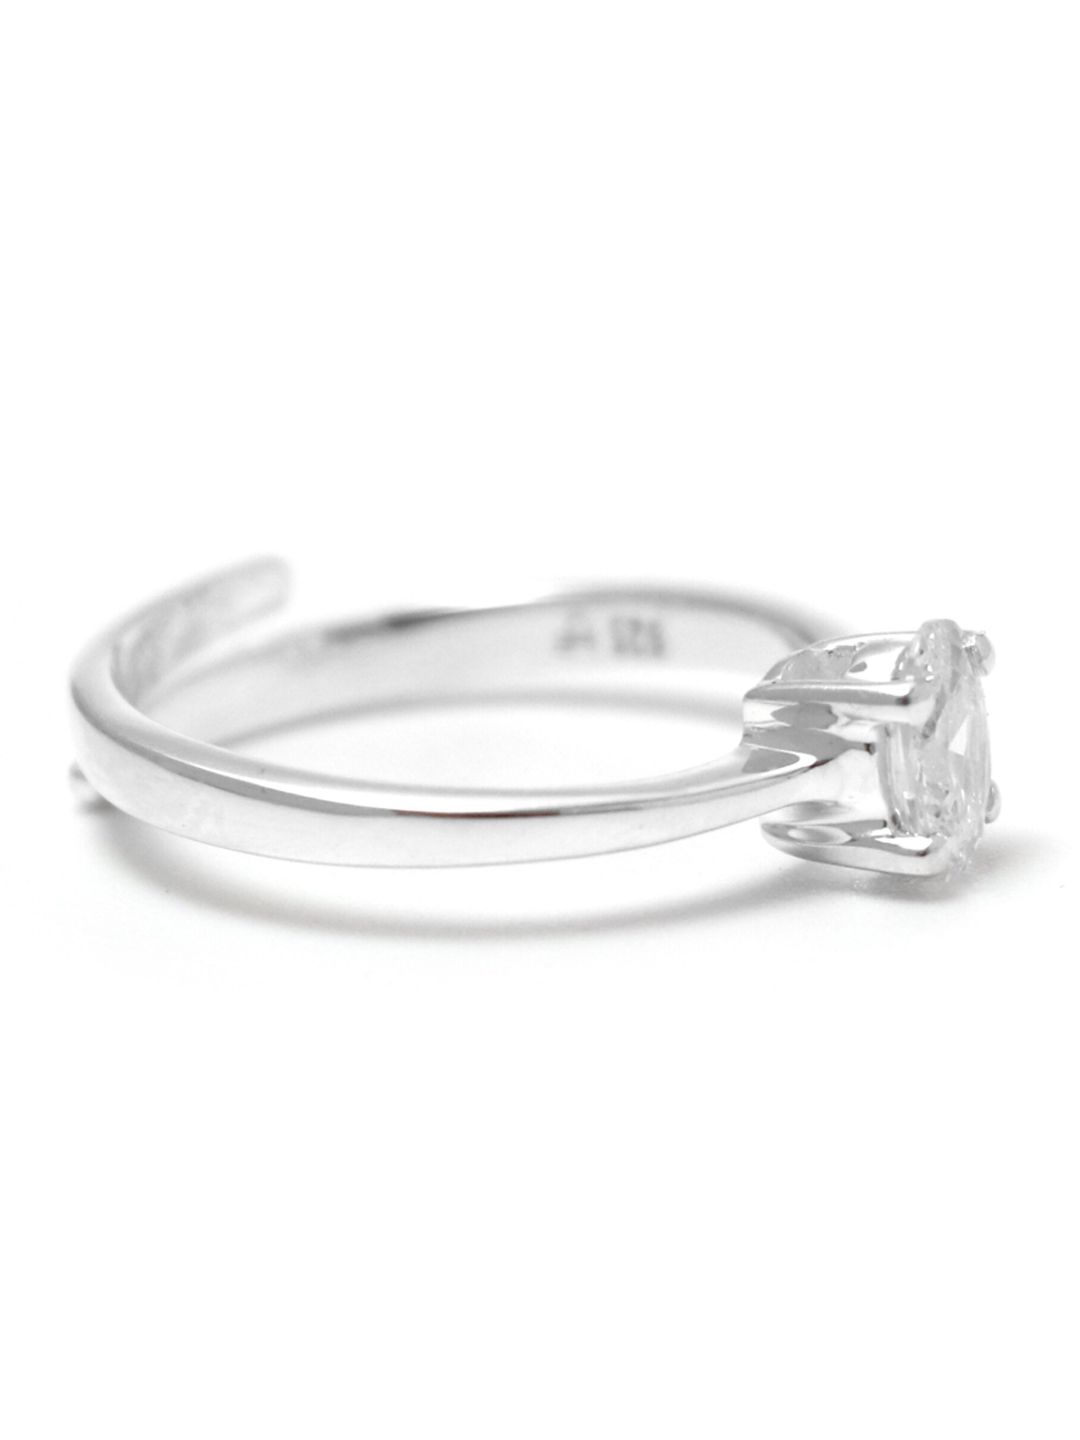 HIFLYER JEWELS  Rhodium-Plated Silver-Toned White  CZ Studded Finger Ring Price in India